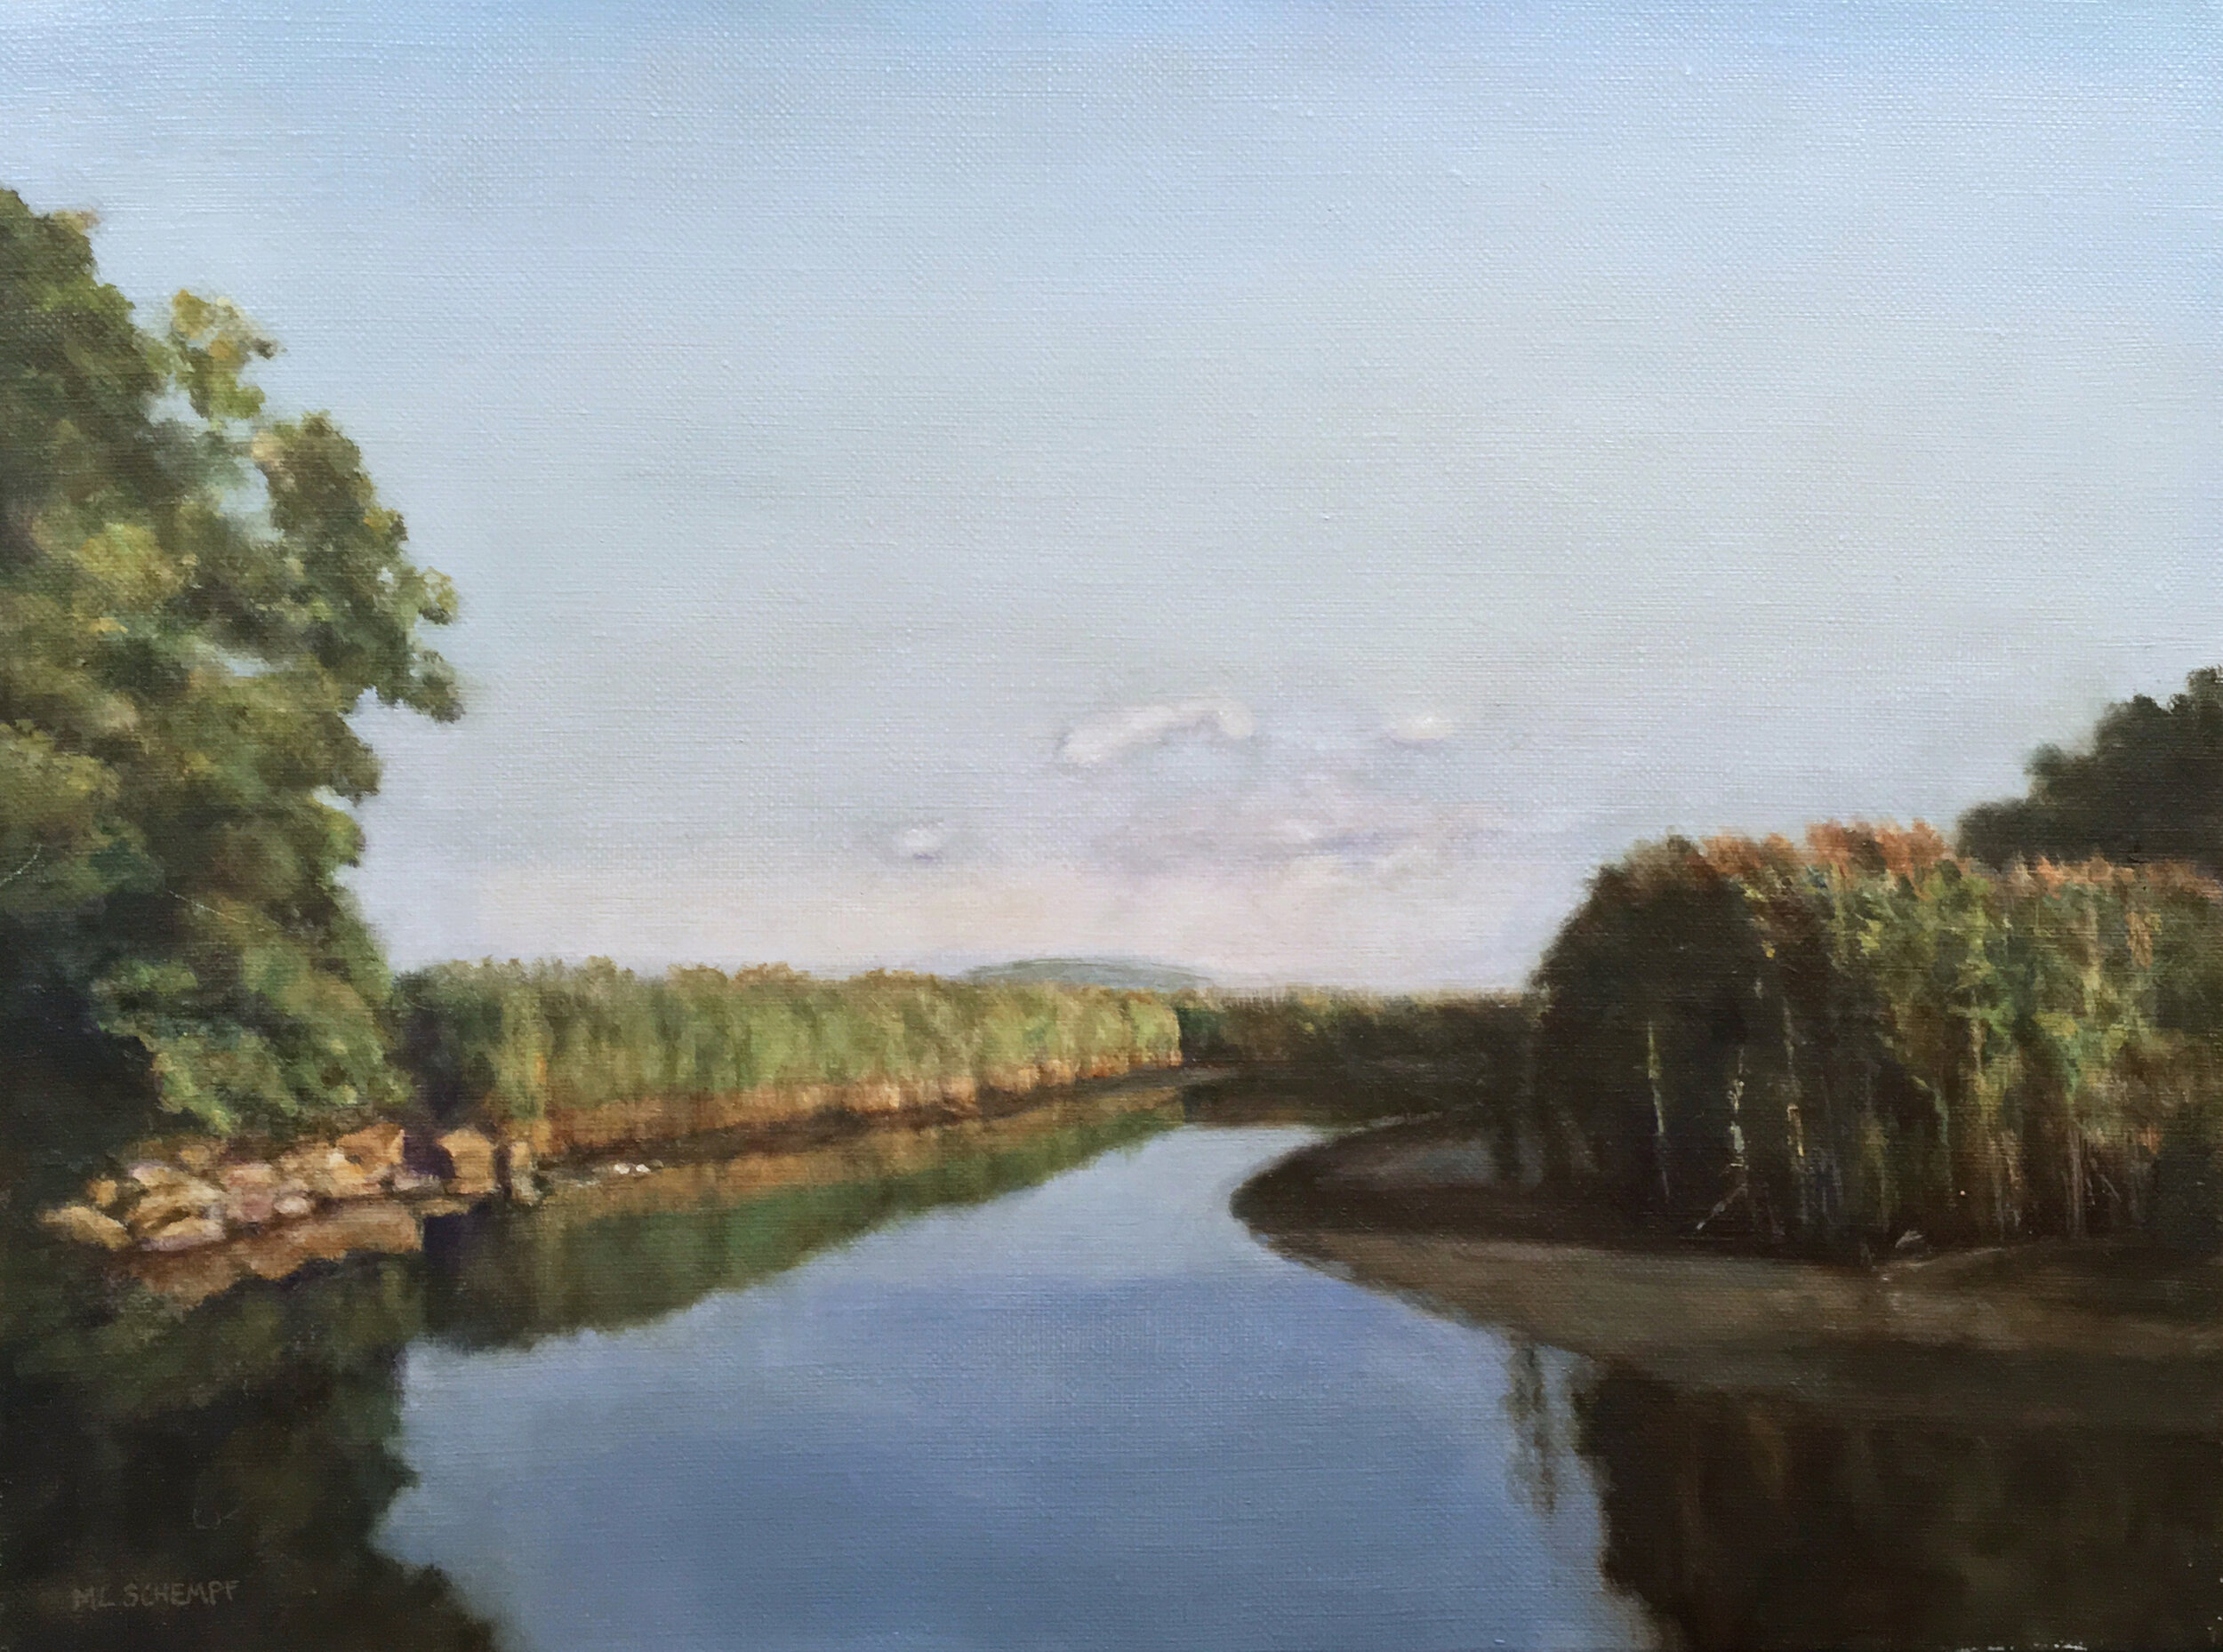   Mary Lou Schempf   Piermont Marsh 2, 12” x 16”, oil on linen  (available)    